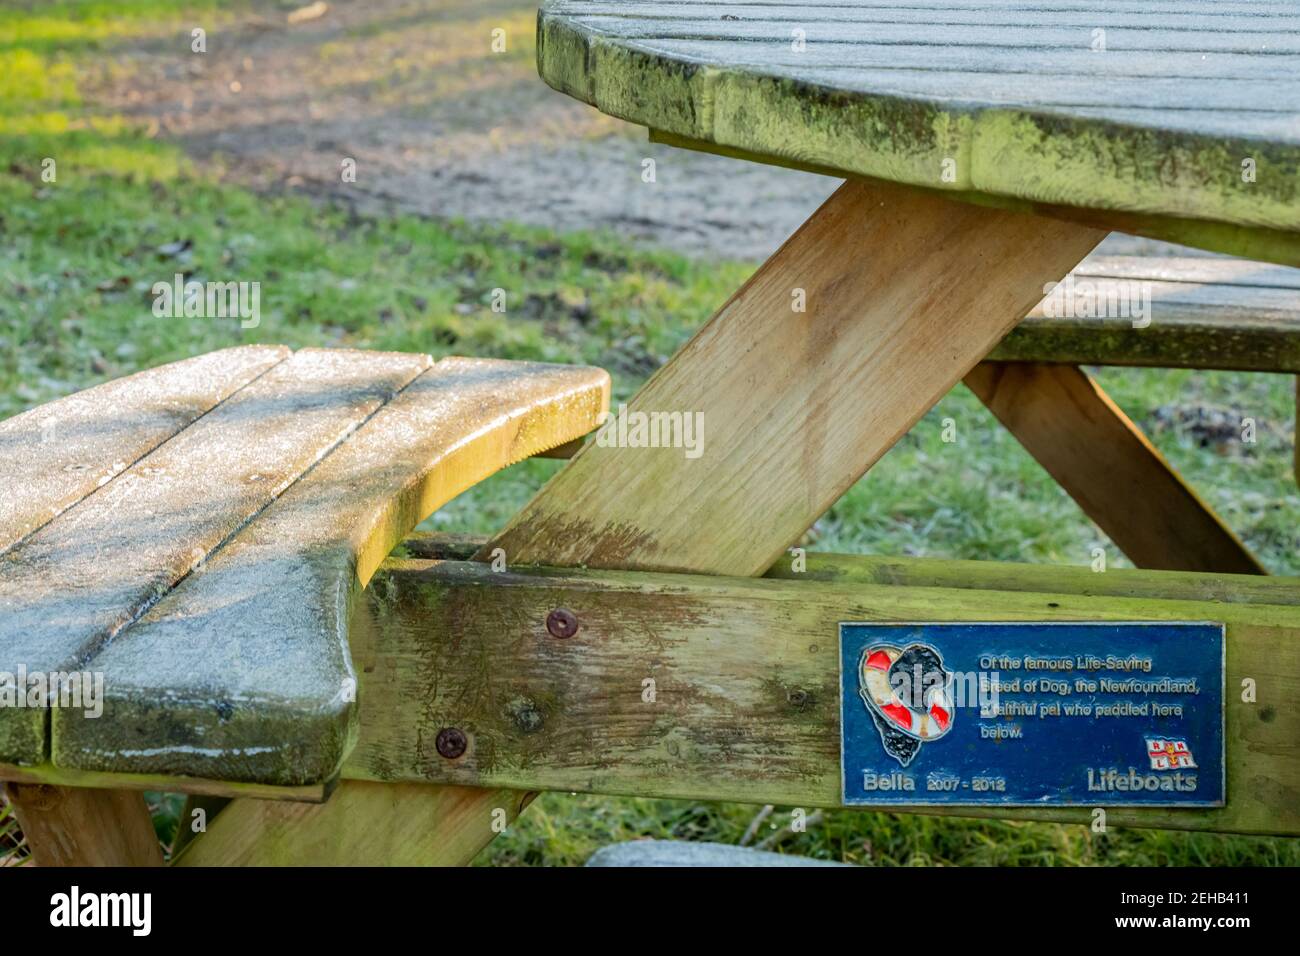 Kirkcudbright, Scotland - 28th December 2020: RNLI Pet memorial plaque for a dog on a wooden bench Stock Photo